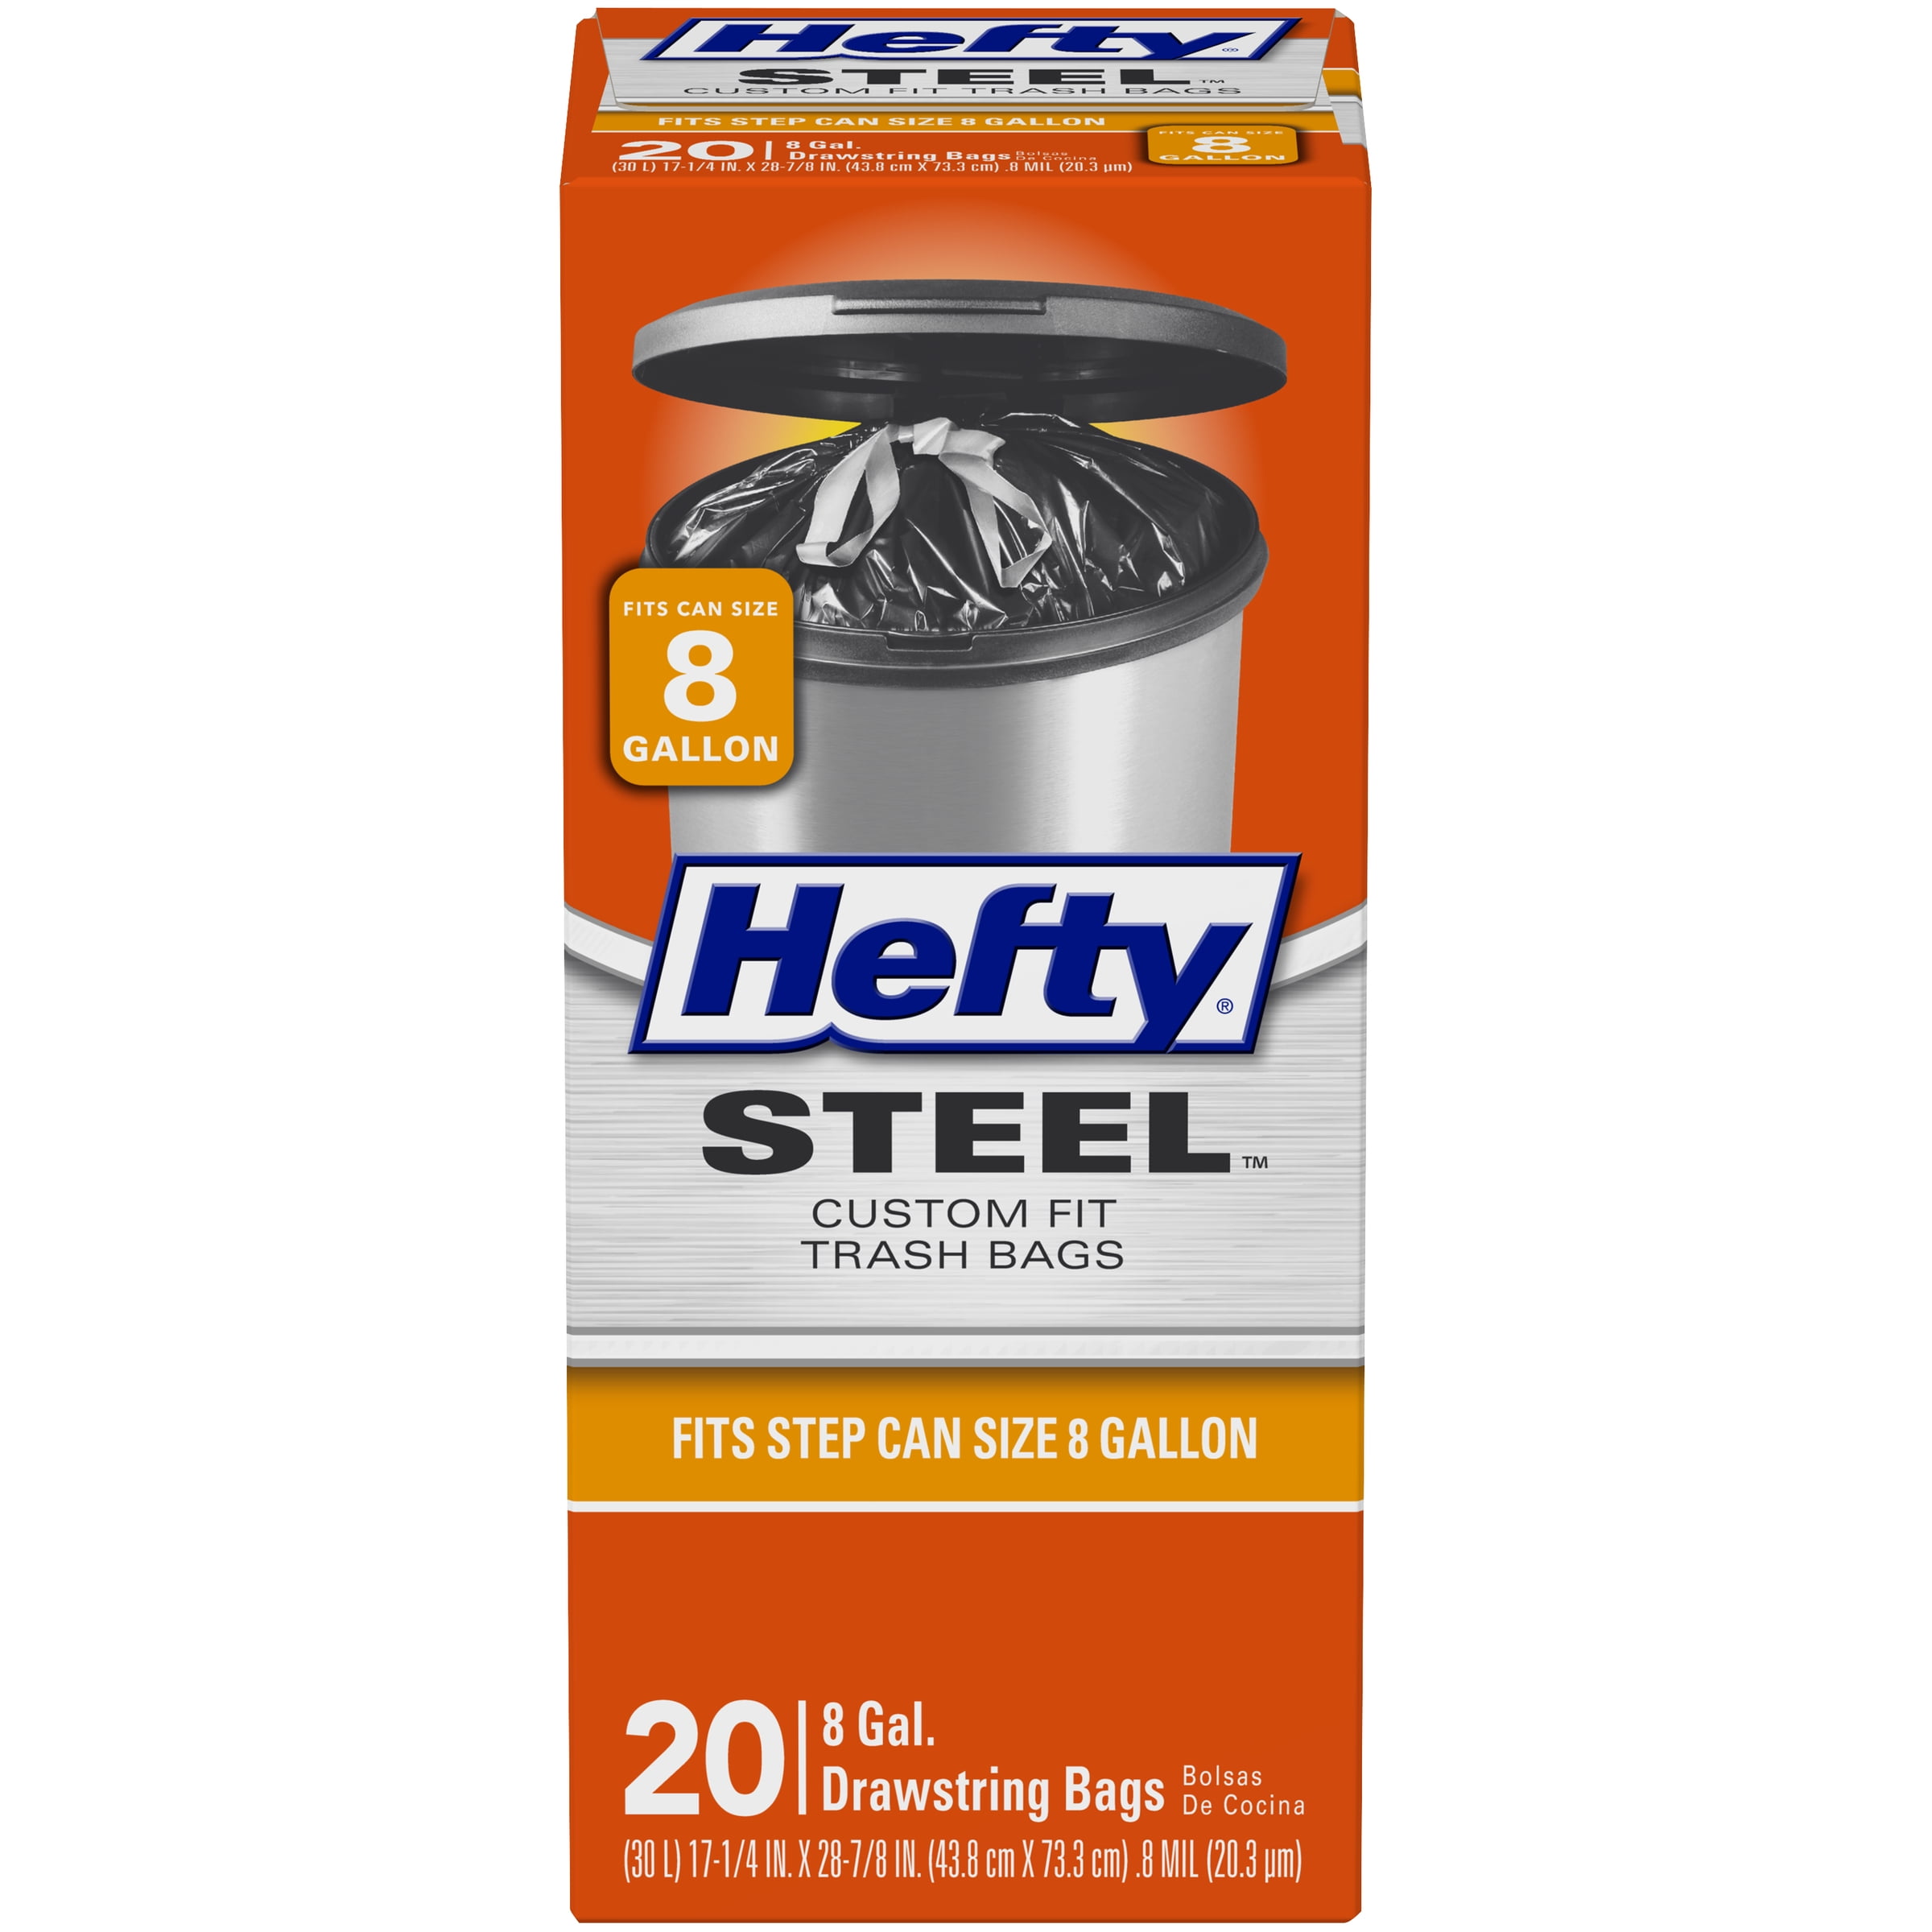 Hefty Steel Custom Fit G Size Drawstring Trash Bags, Black, Unscented, 8 Gallon, 20 Count